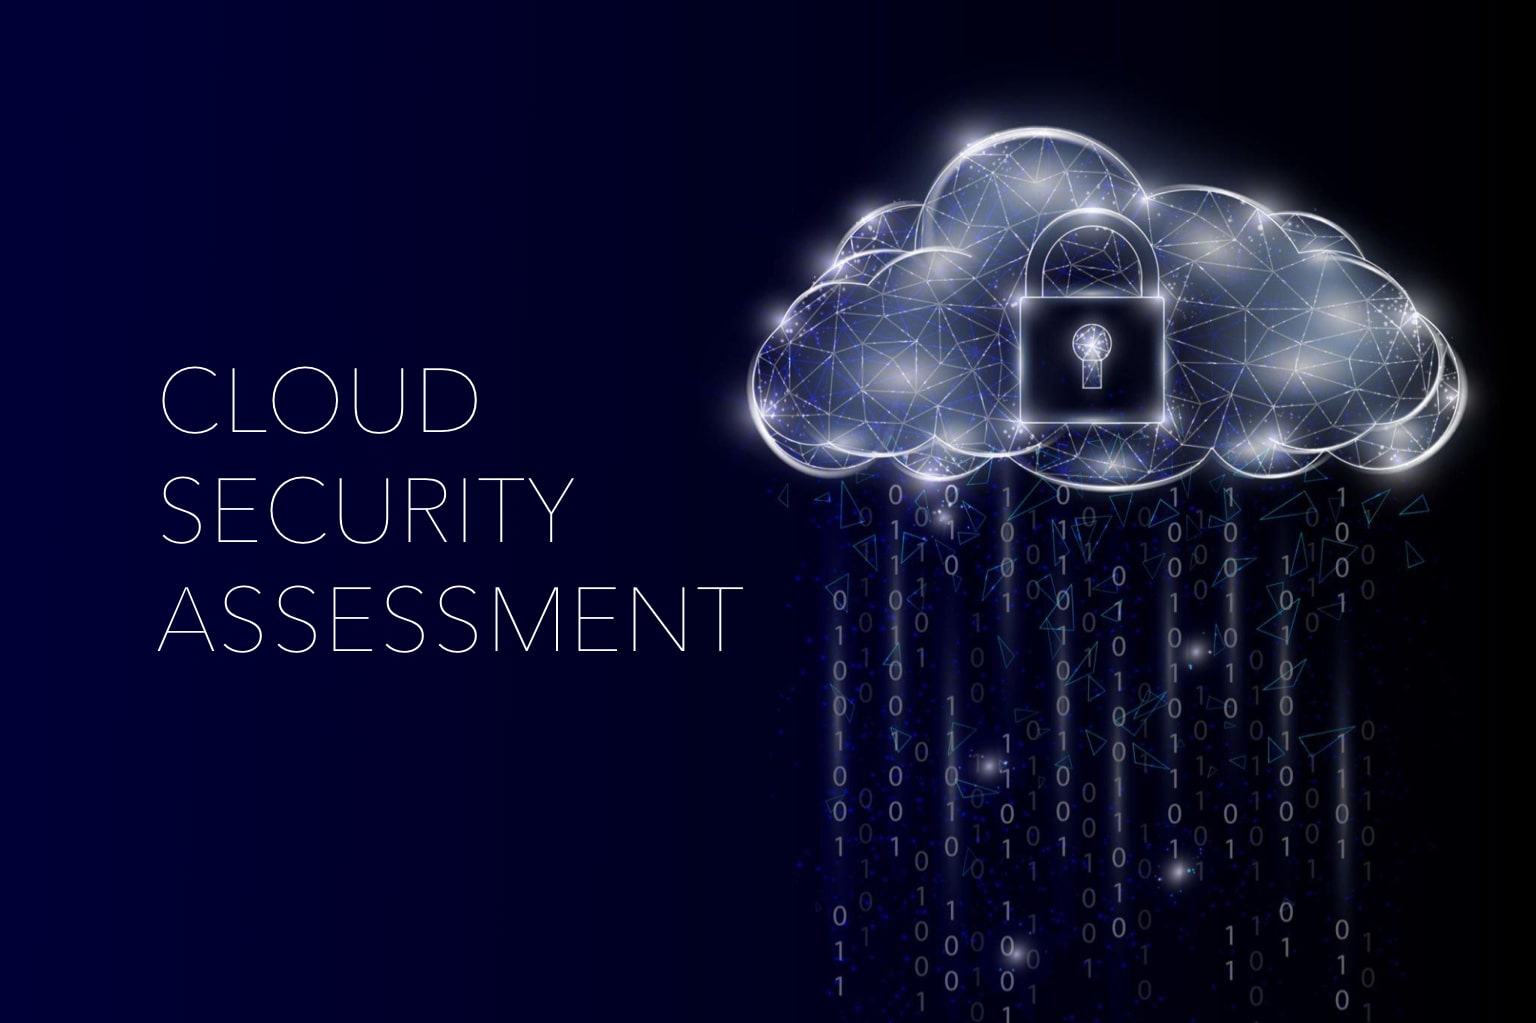 How to Conduct a Cloud Security Assessment